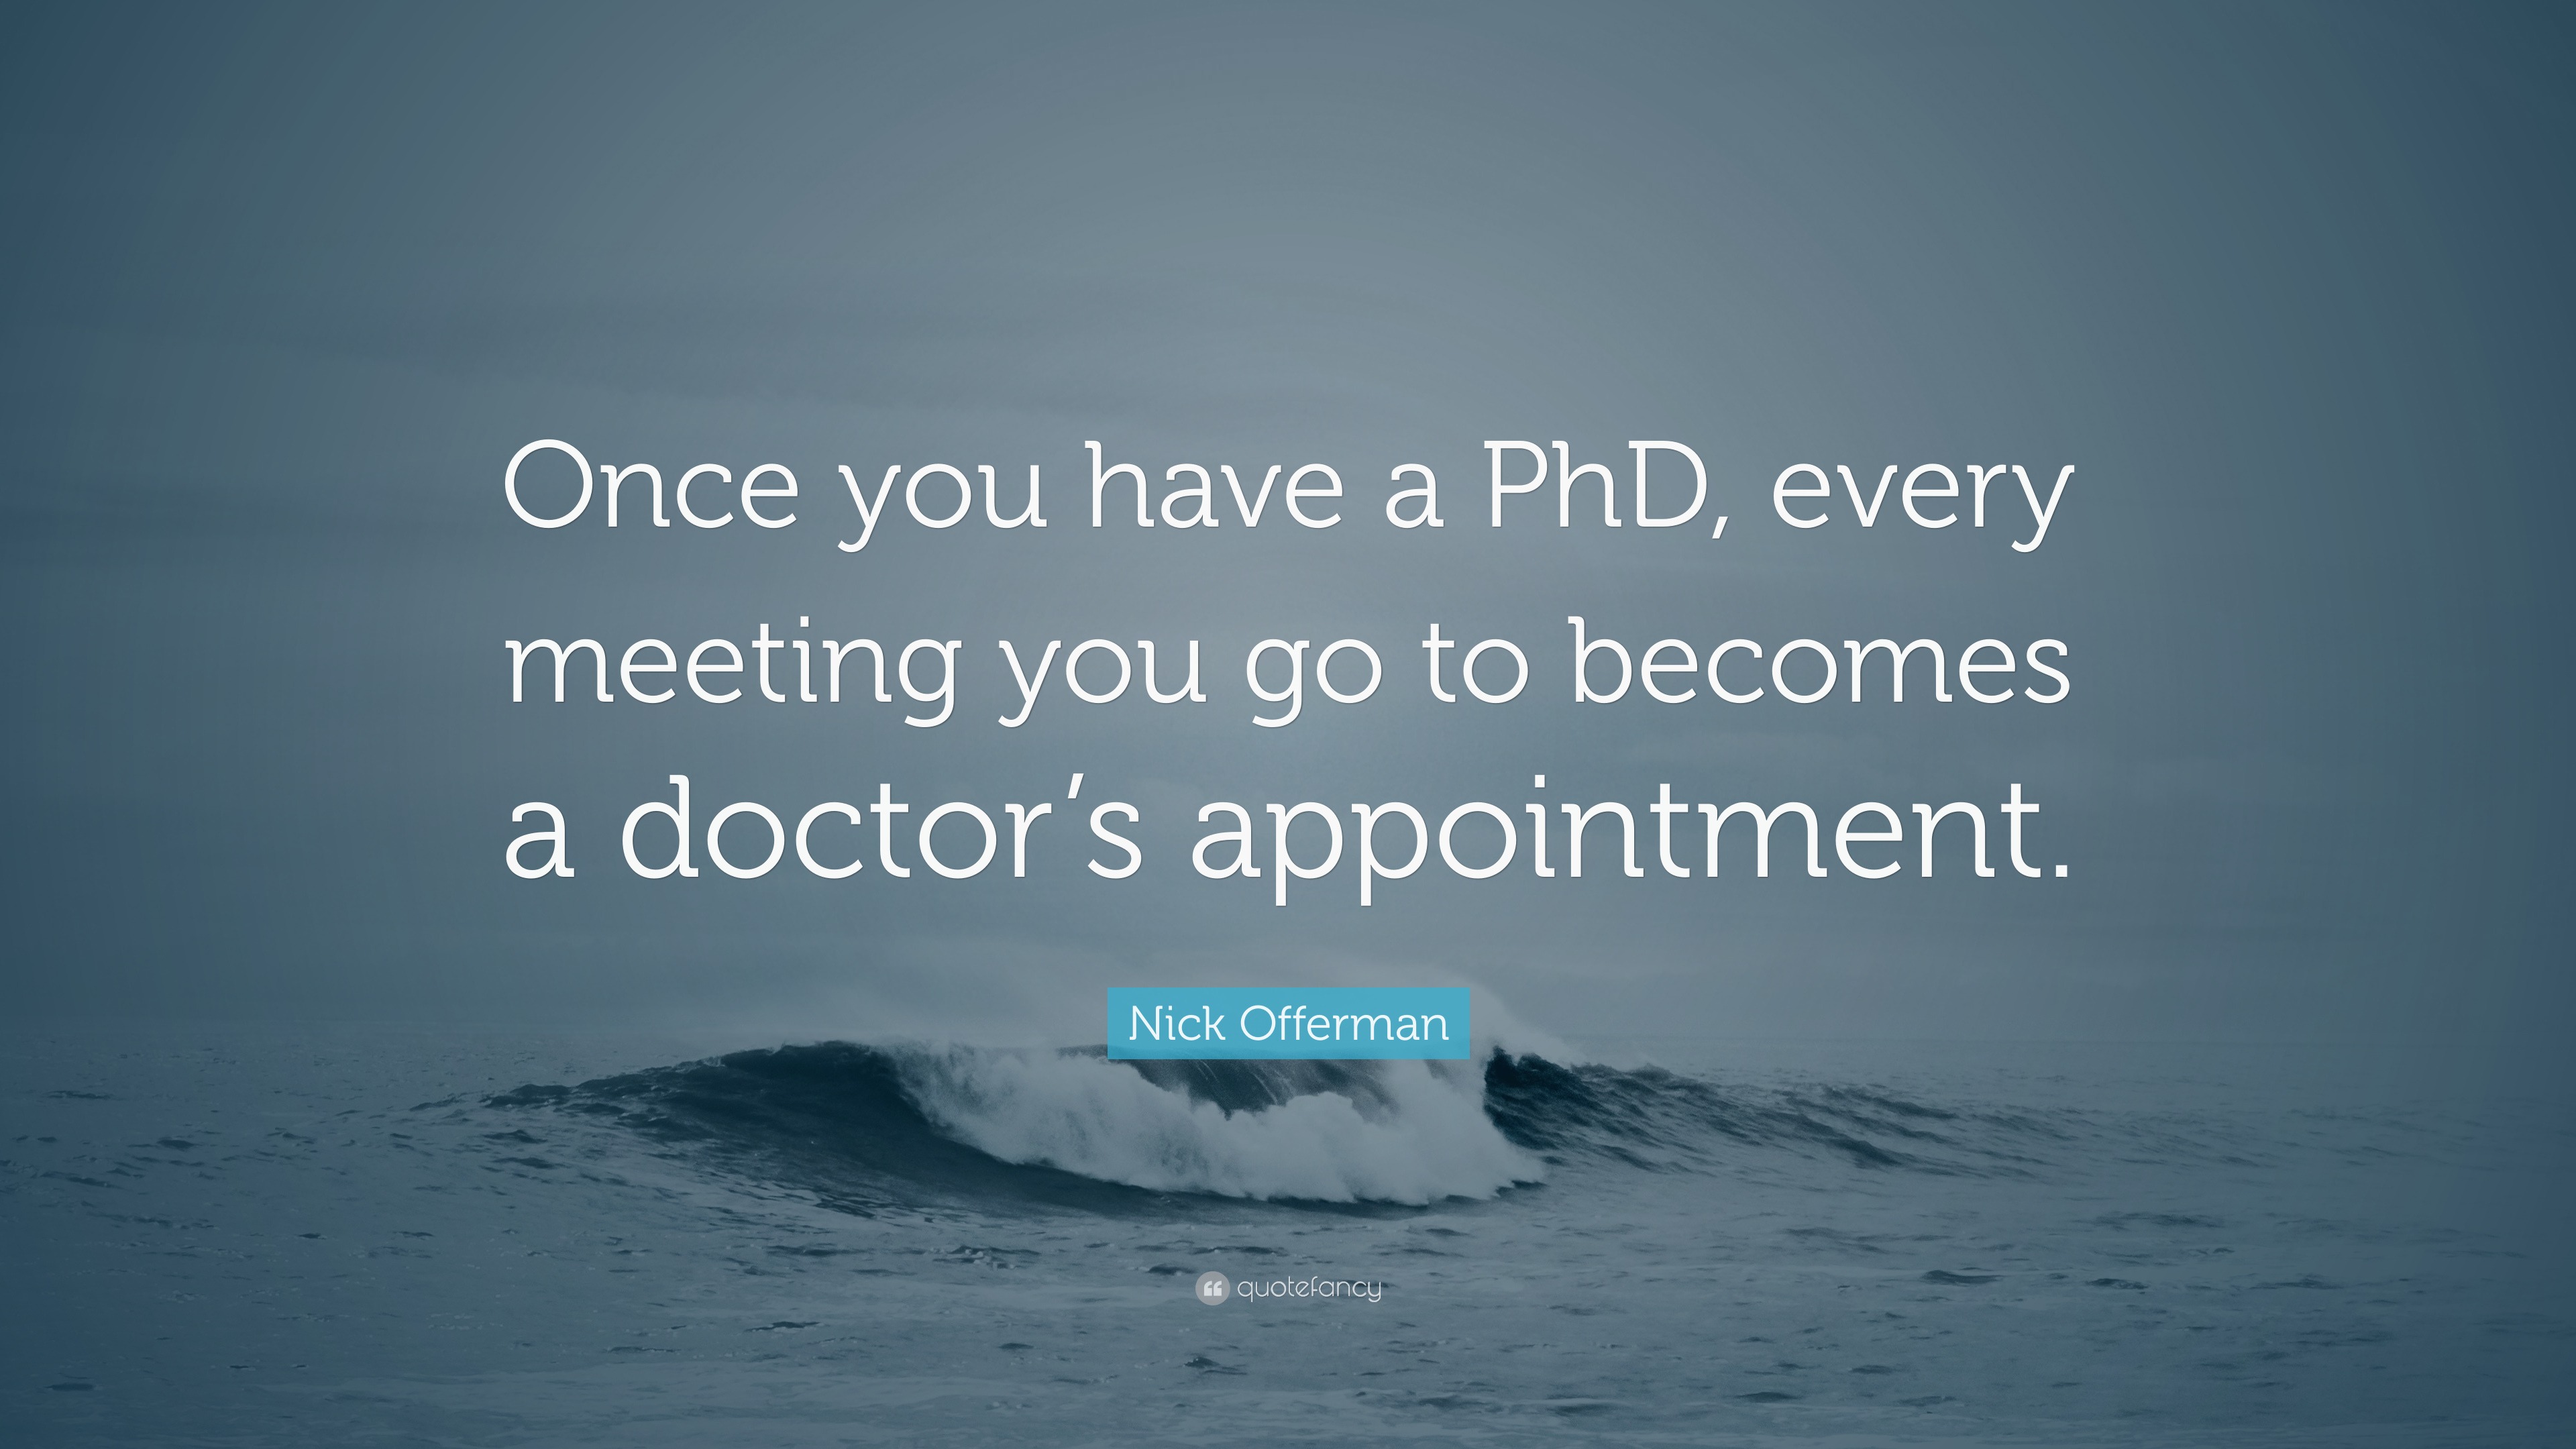 phd in quotes